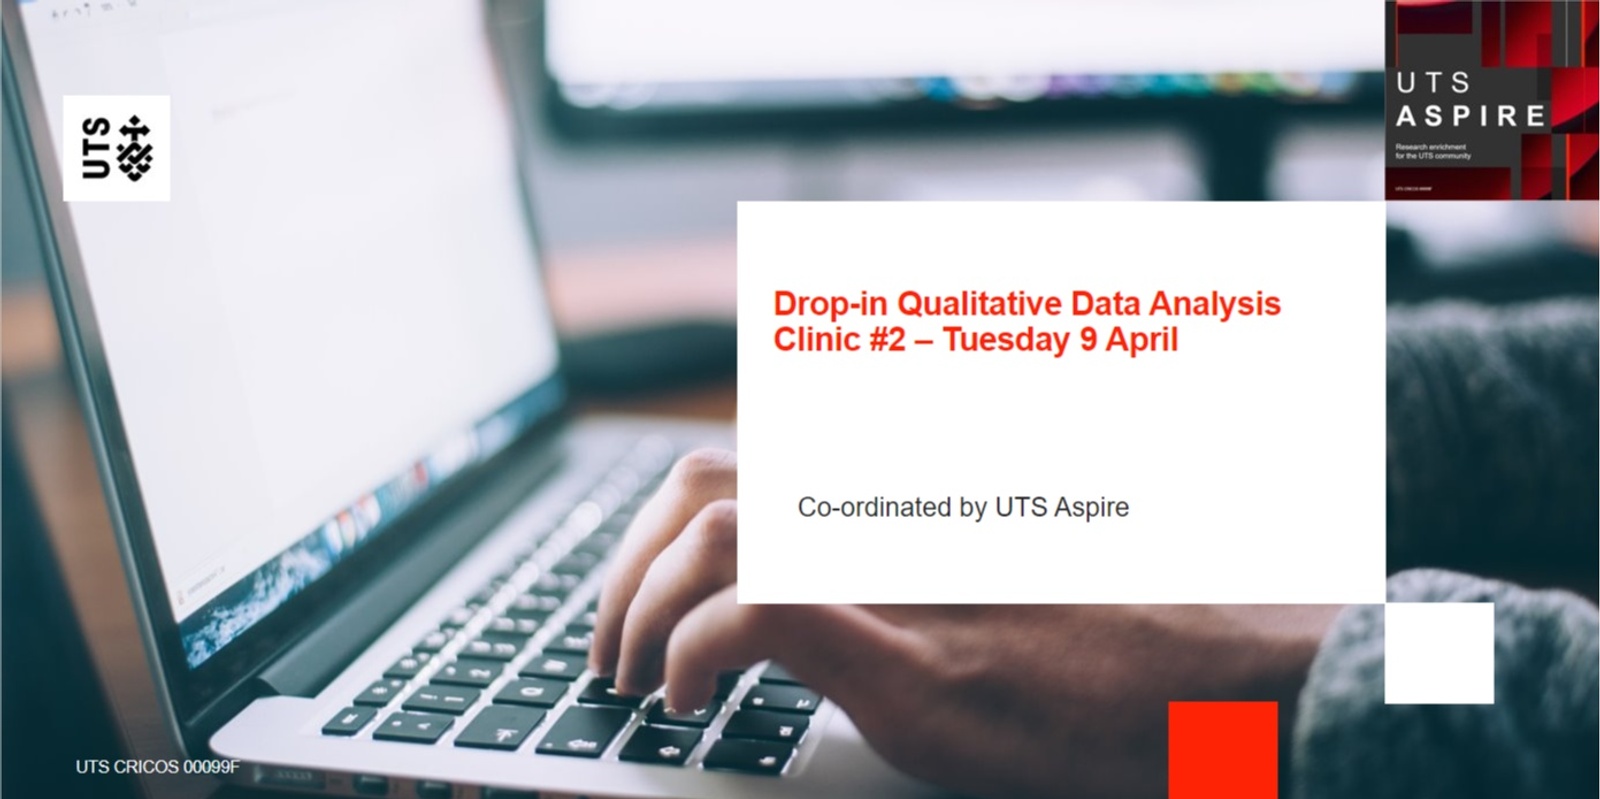 Banner image for Drop-in Qualitative Data Analysis Clinic #2